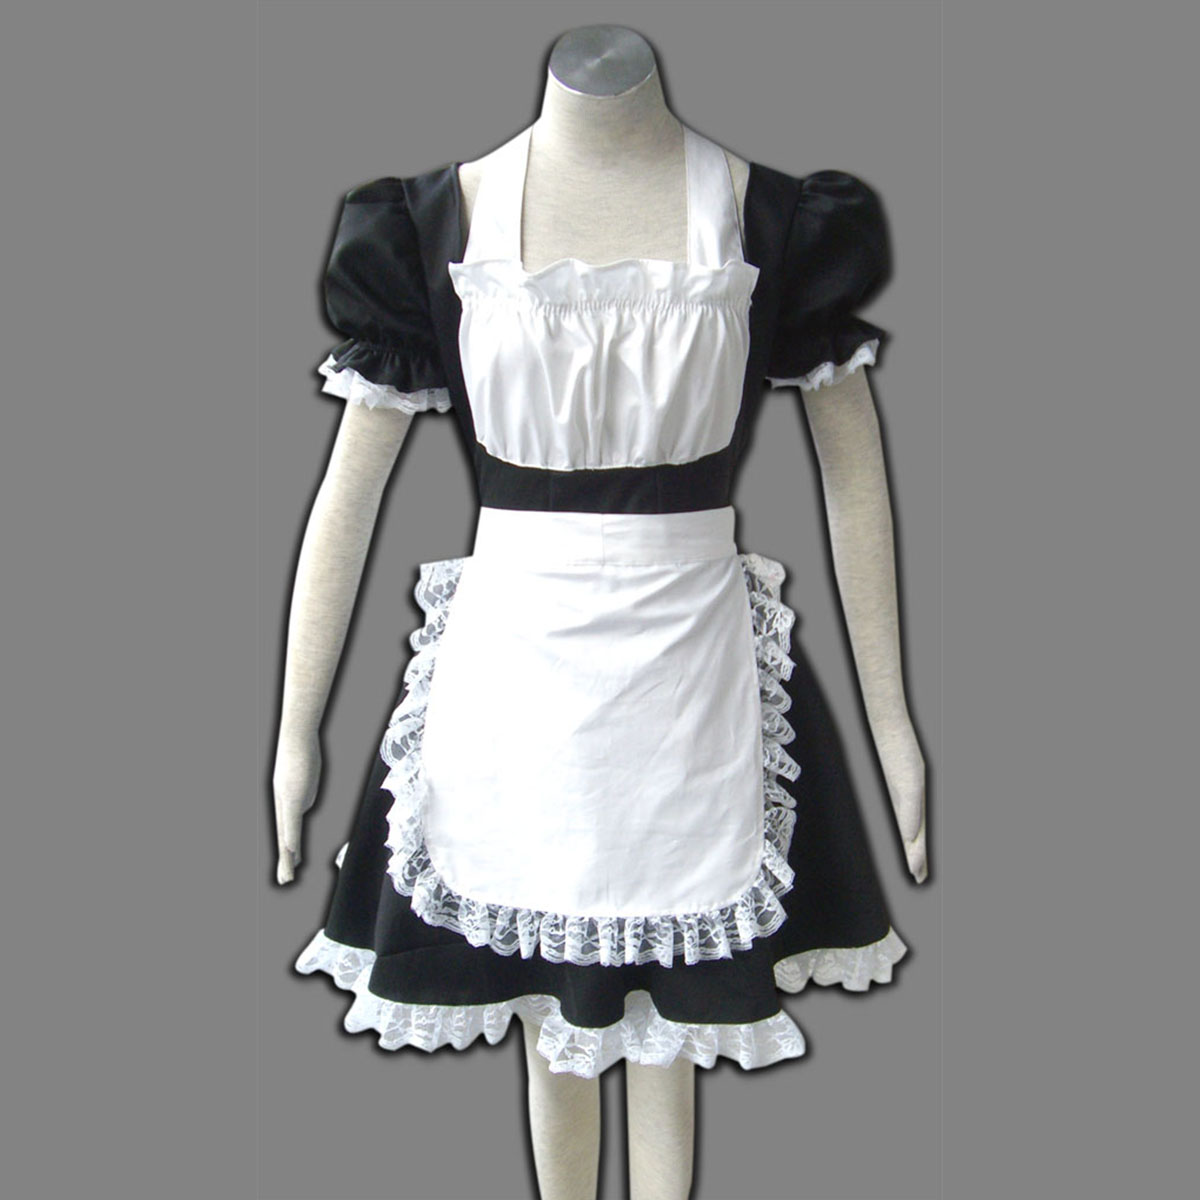 Maid Uniform 2 Black Winged Angle Cosplay Costumes New Zealand Online Store